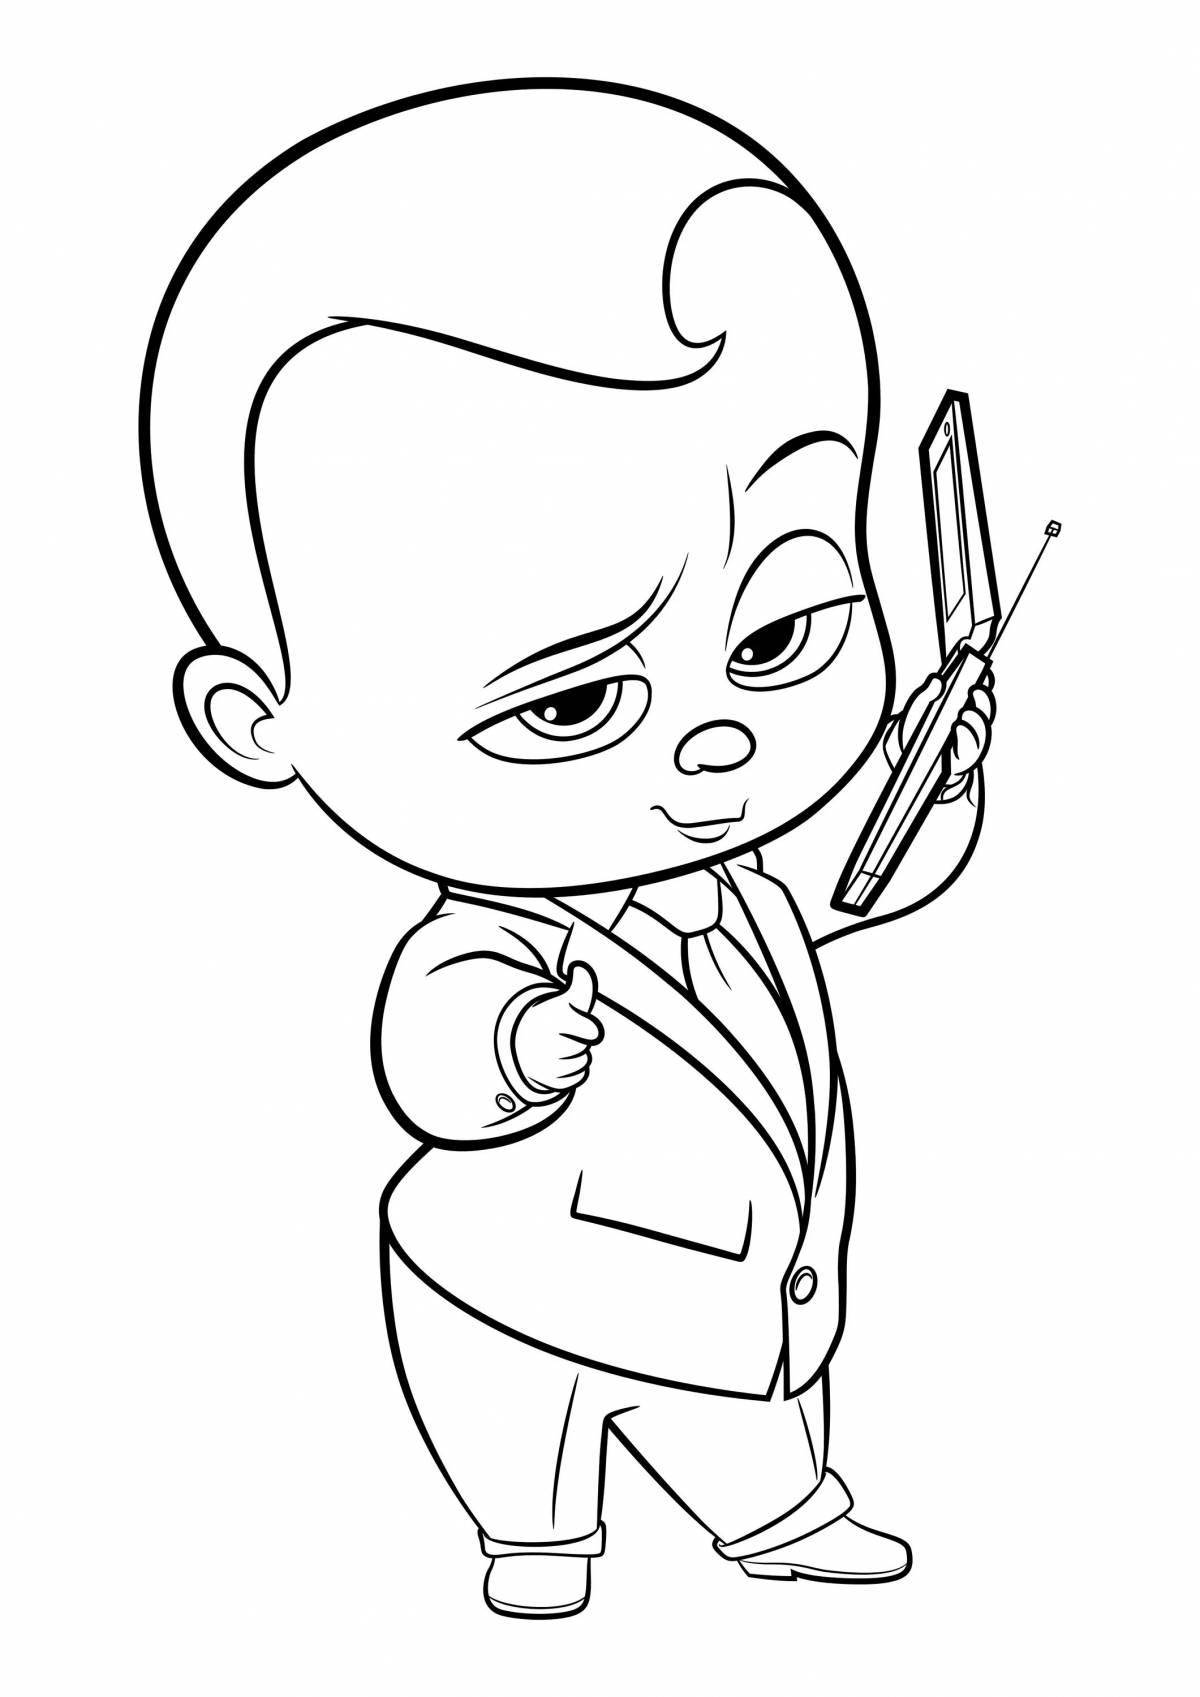 Sweet baby boss coloring page